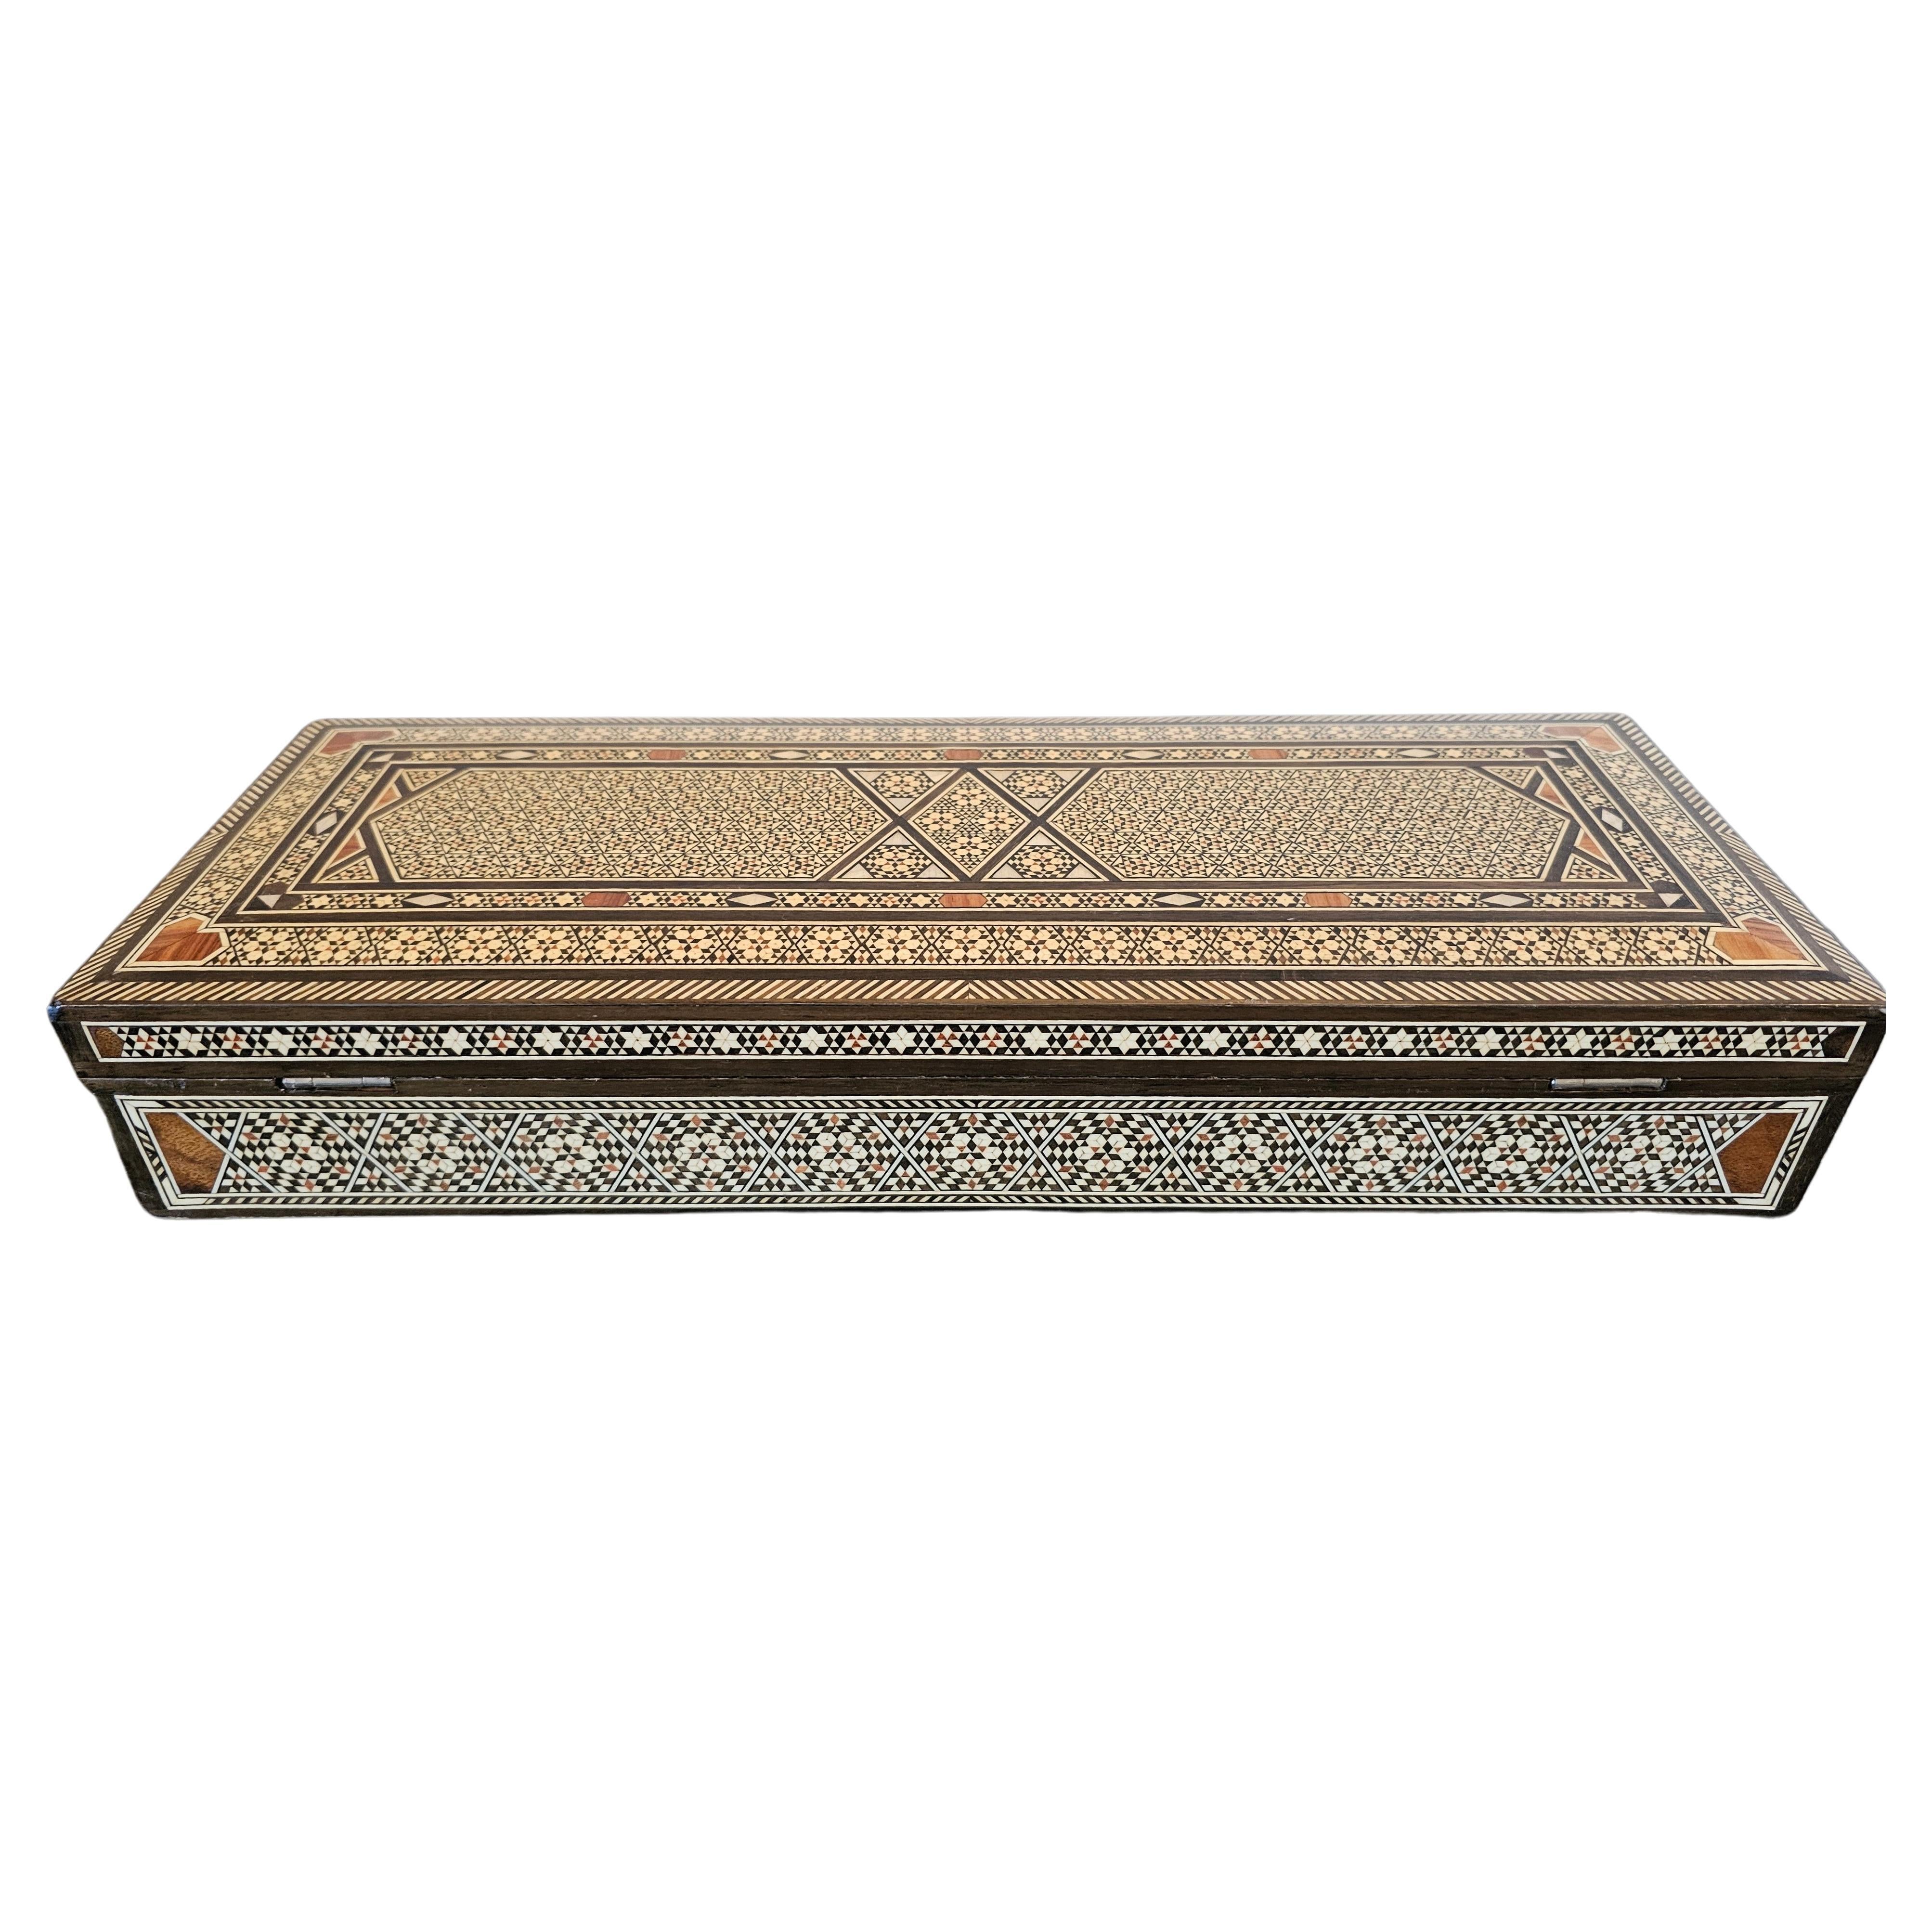 A stunning vintage Moorish arabesque inlaid table box, 20th century, high quality rectangular box with hinged lid, featuring contrasting mother of pearl, exotic hardwood, and bone marquetry inlay arranged in geometric patterns, opening to red fabric